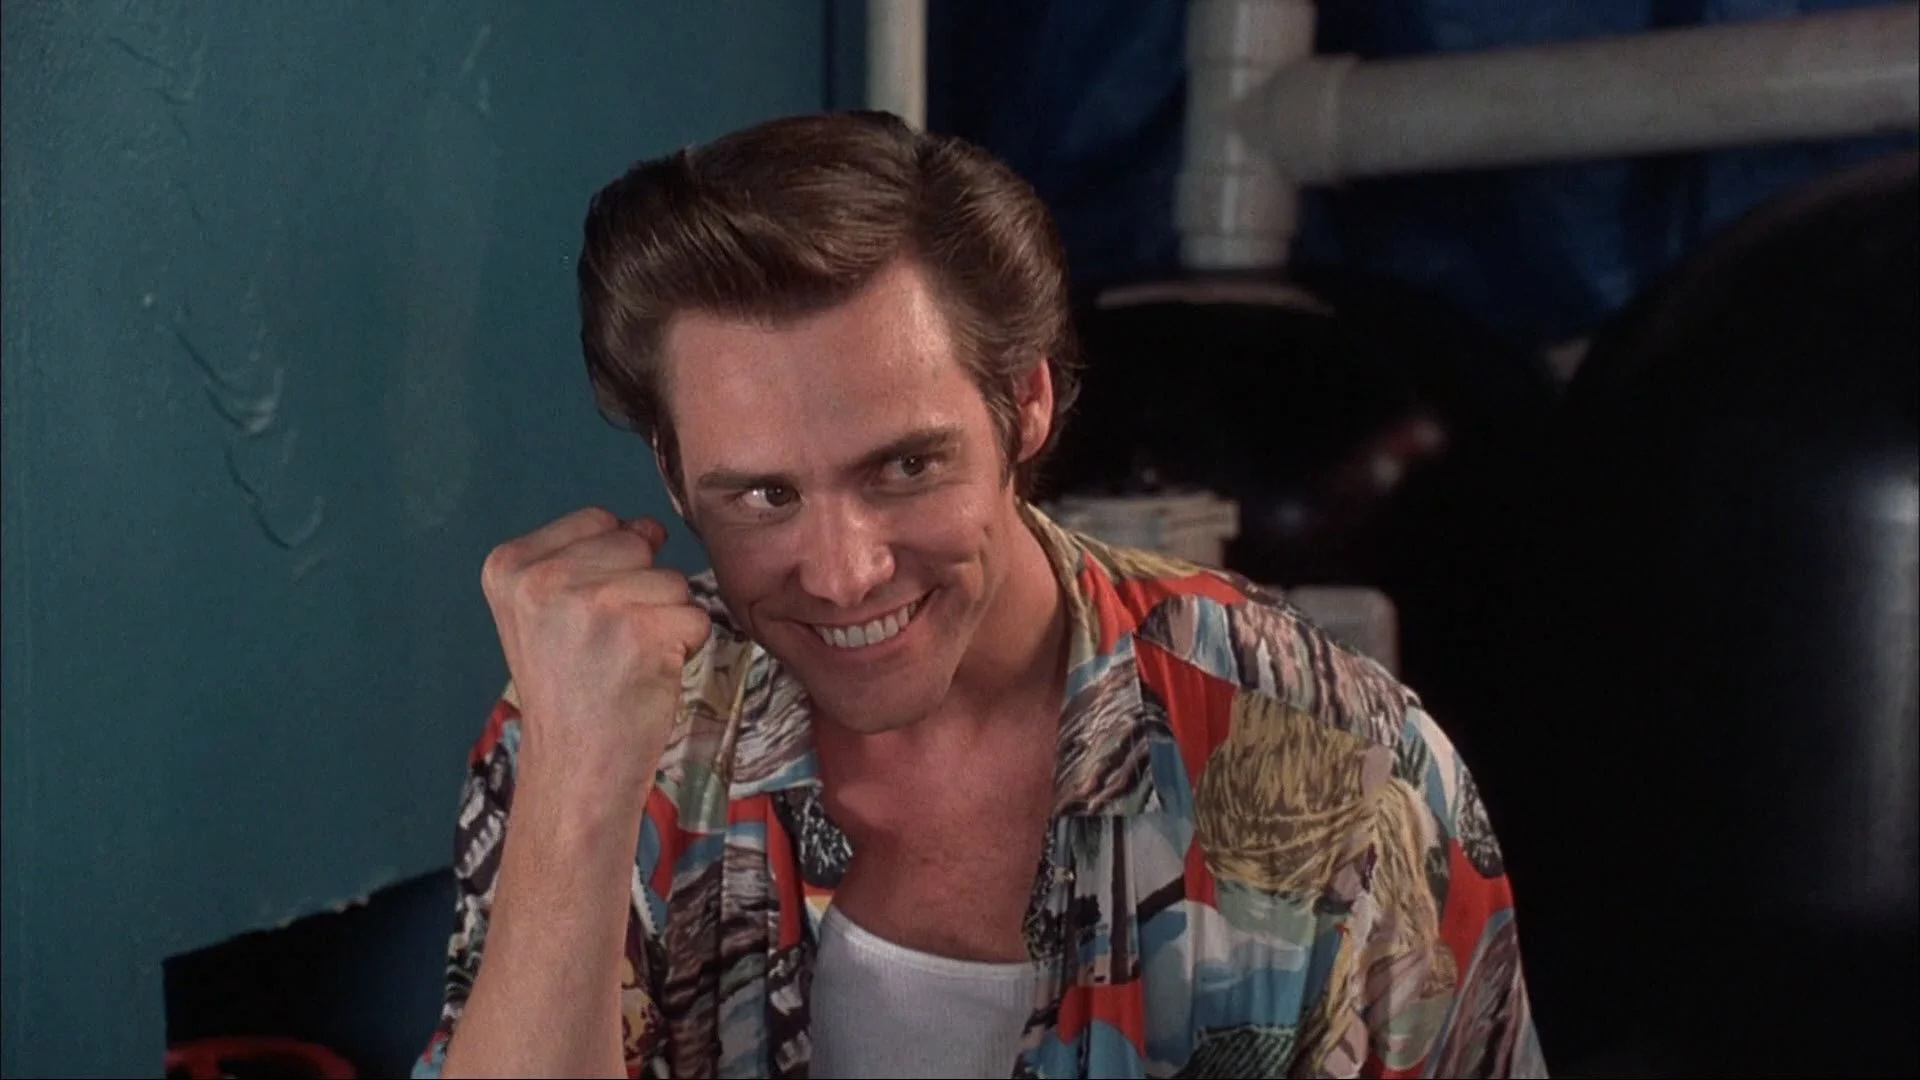 Ace Ventura: The role of a pet detective, A huge commercial success for Jim Carrey. 1920x1080 Full HD Wallpaper.